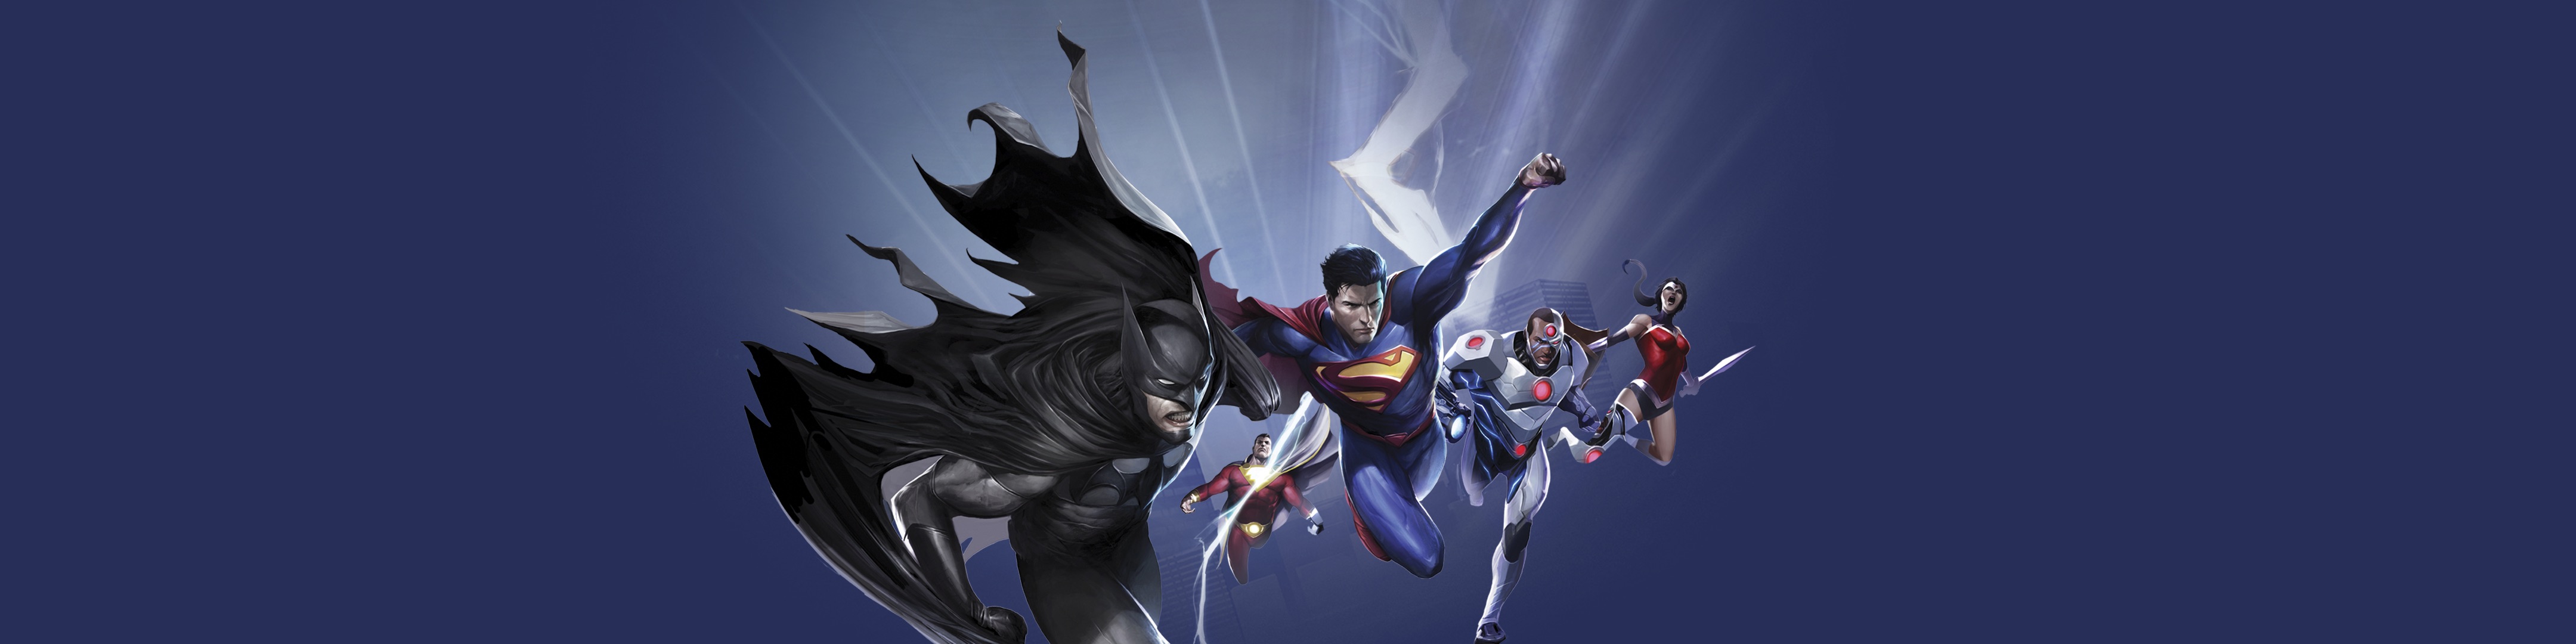 DC animated movies 4320x1080 wallpaper